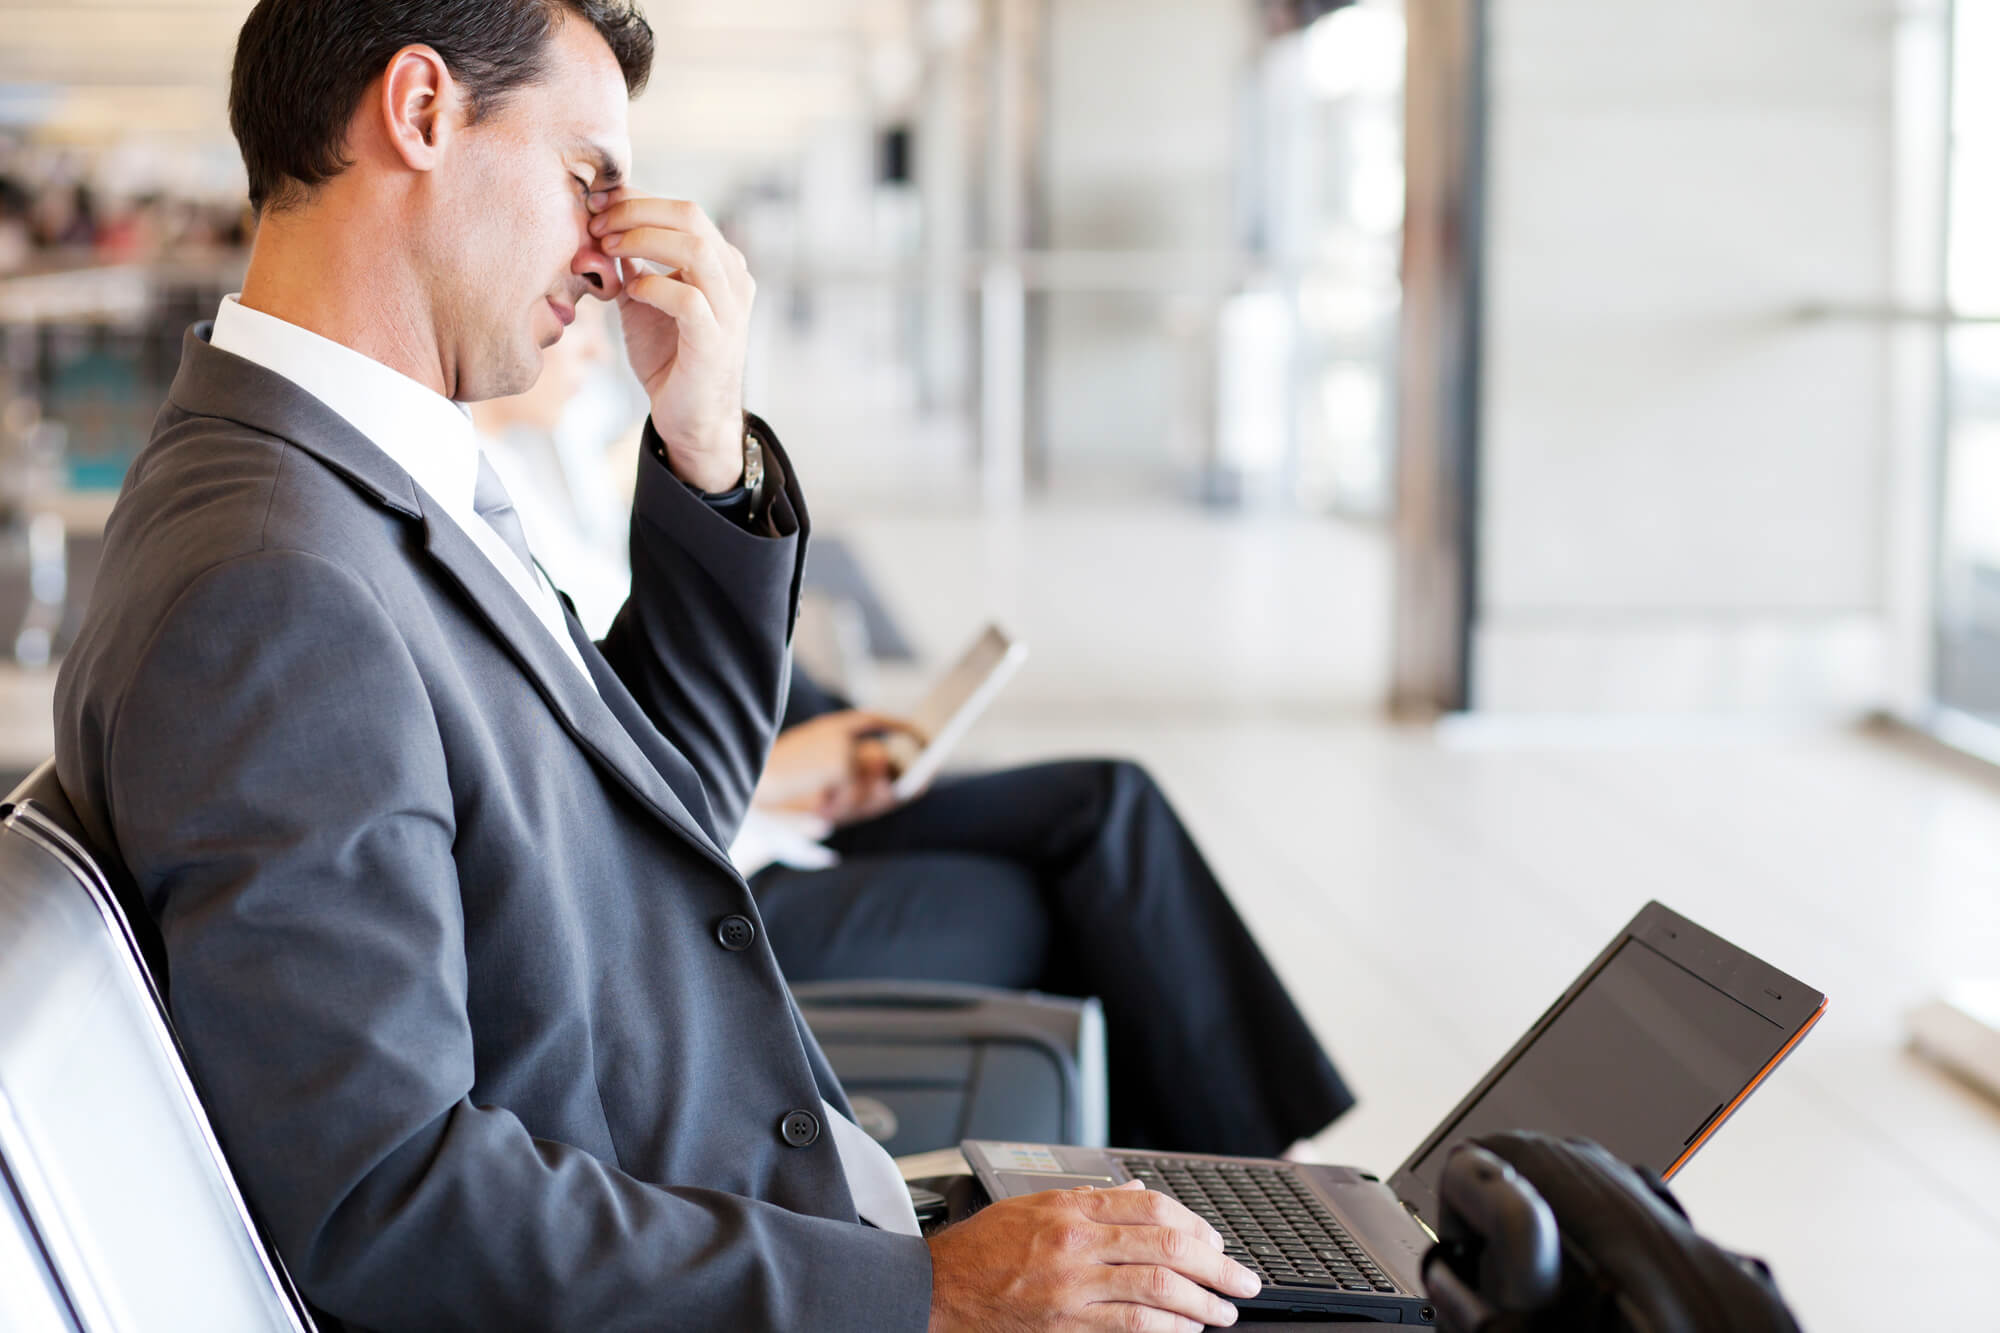 A tired businessman in a gray suit sits at an airport with a computer sitting on his lap. He is rubbing the bridge of his nose and looks fatigued. He may be suffering from the symptoms of male hypothyroidism.